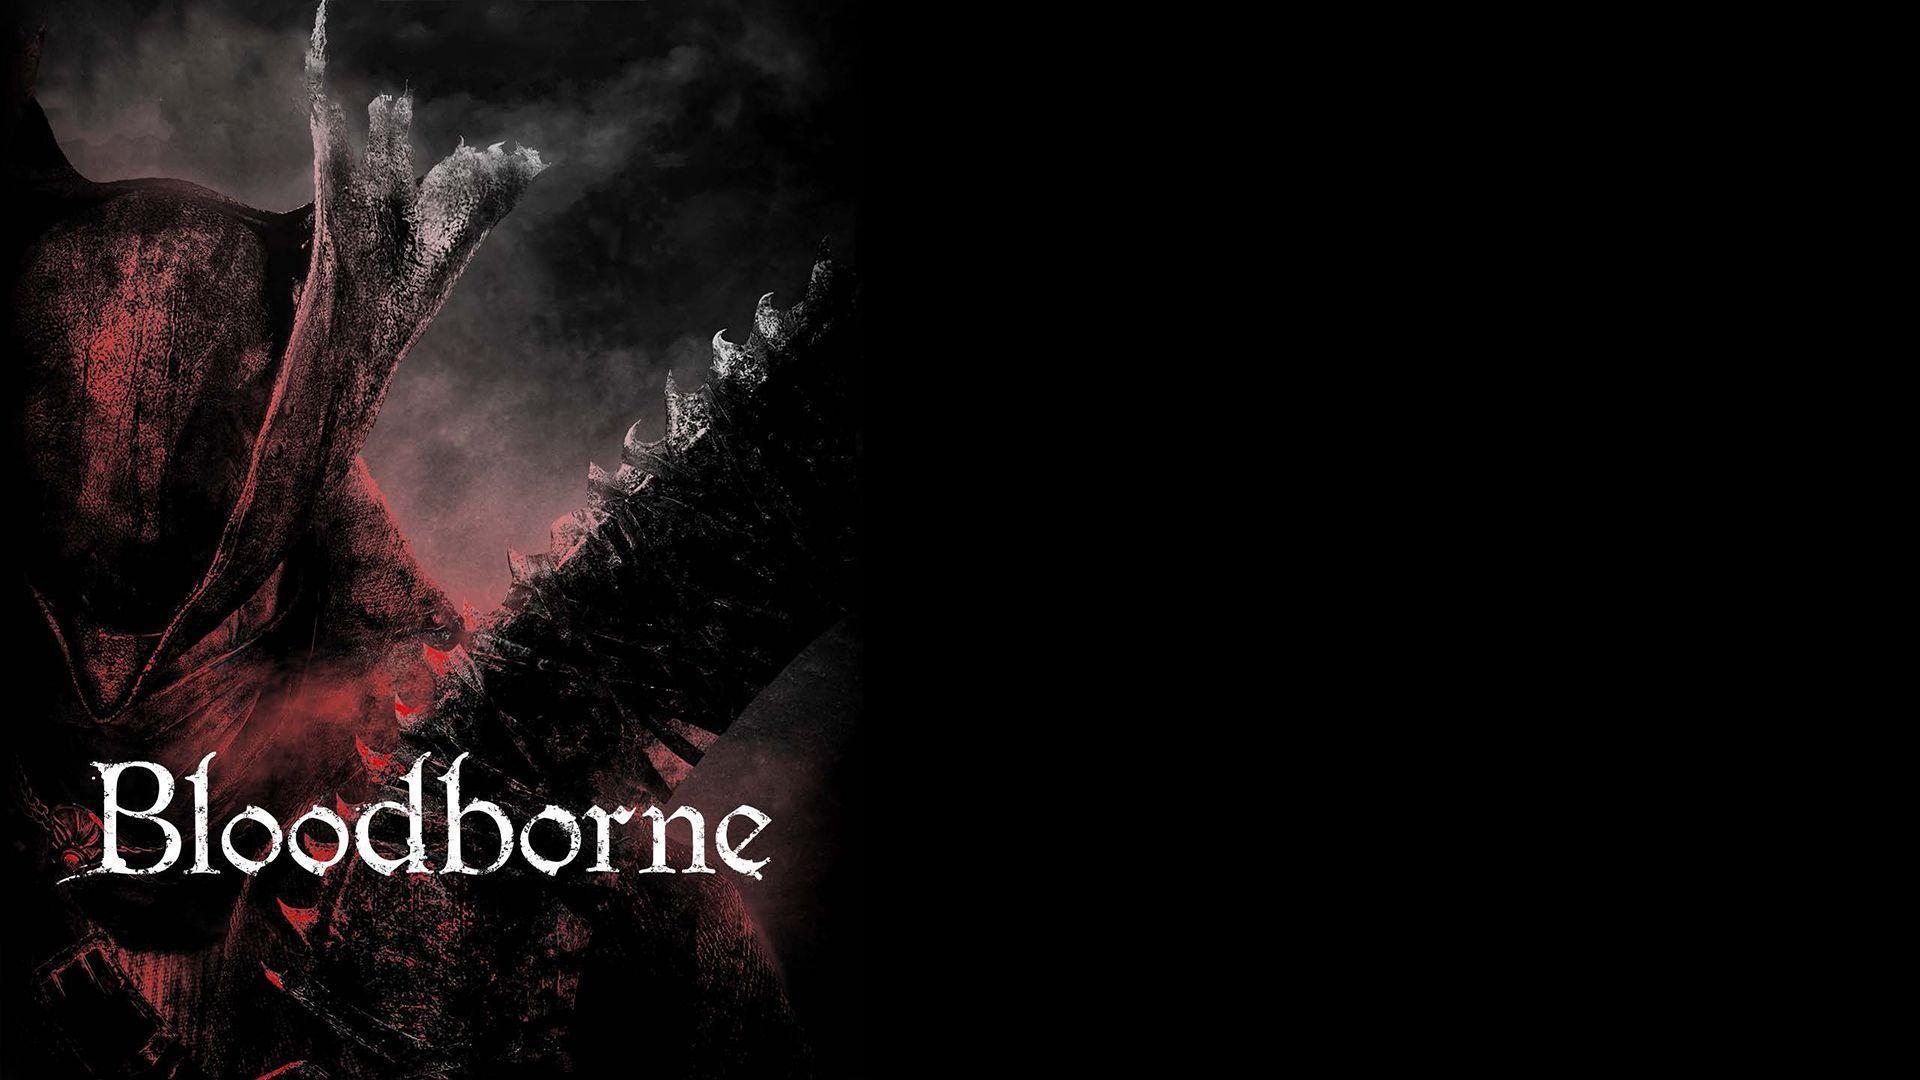 My Collection of Bloodborne Wallpaper. Personal Web Site